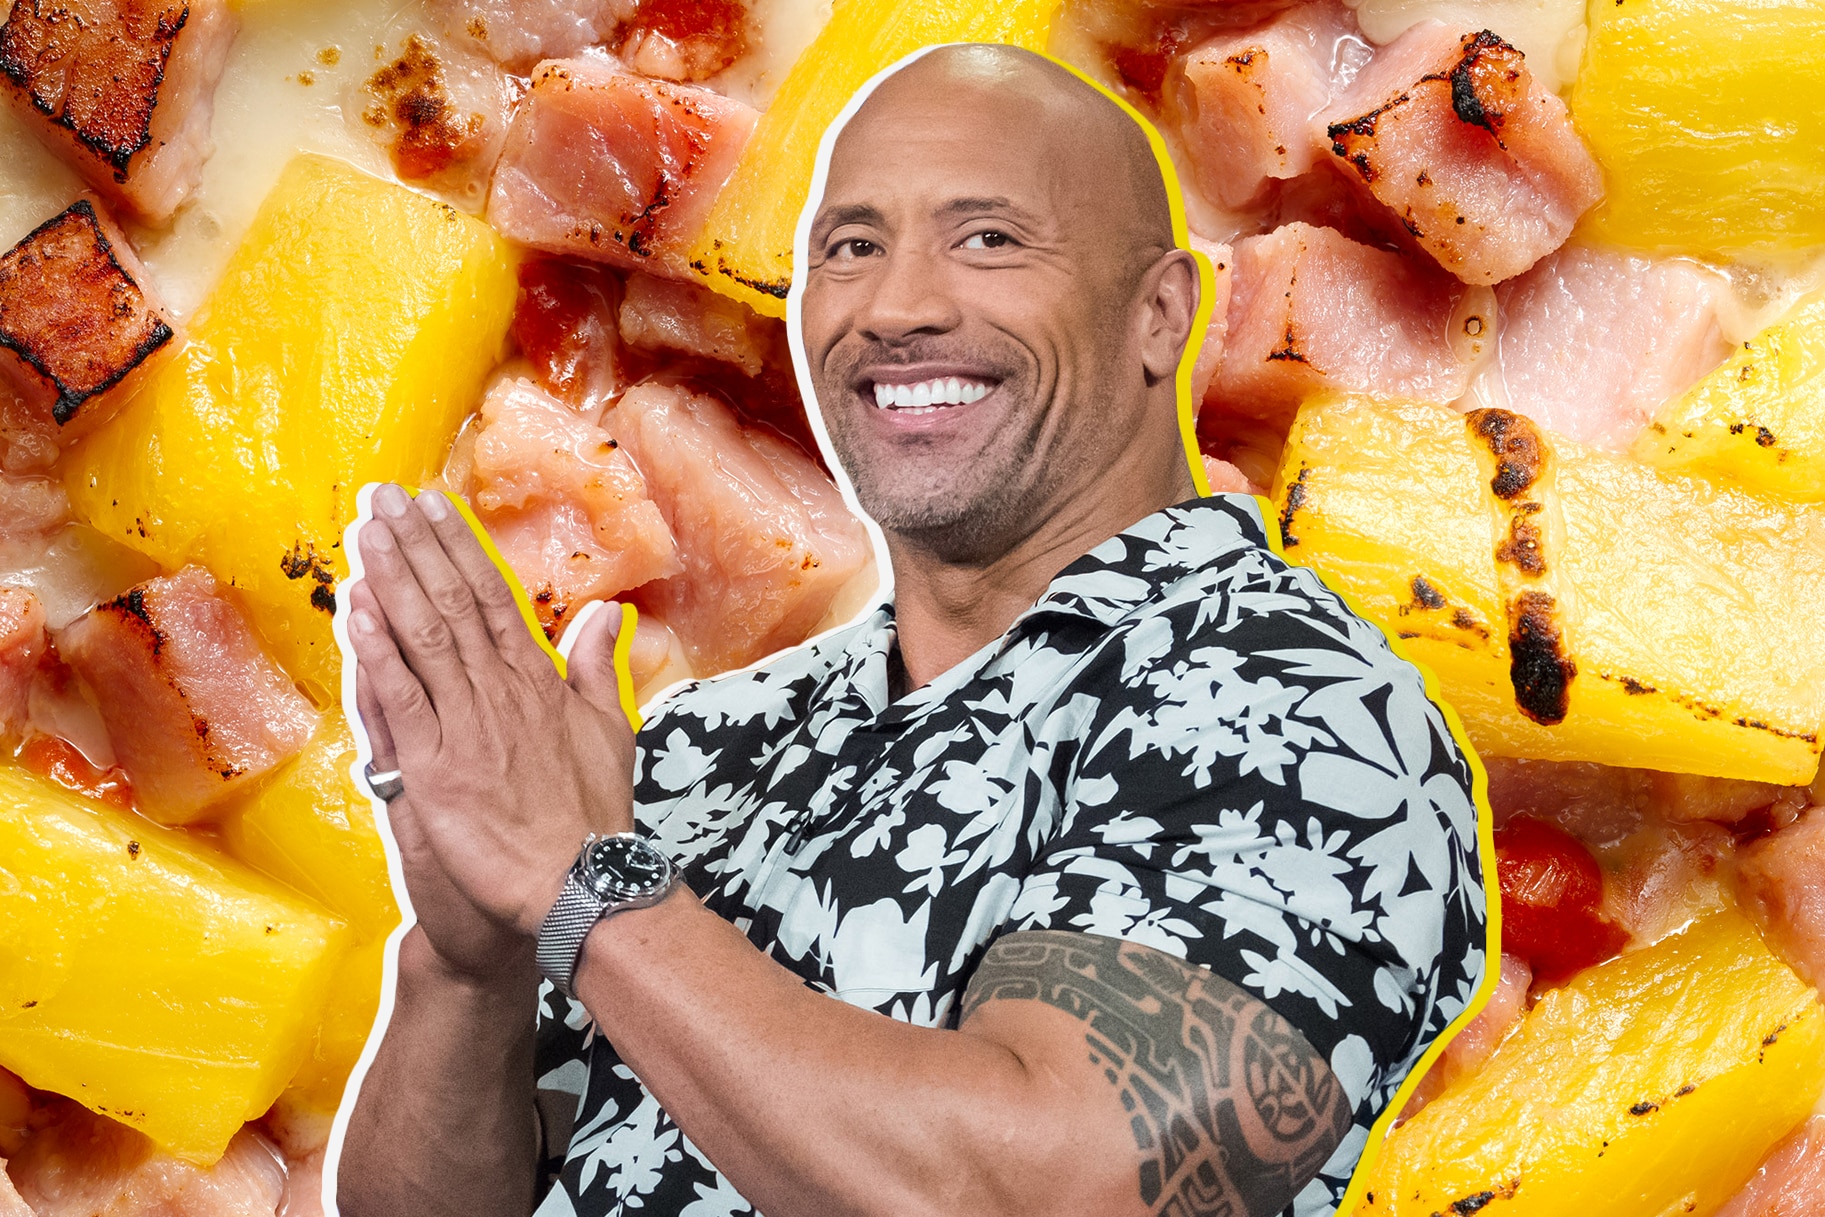 It's official: Dwayne Johnson is a pineapple-on-pizza kind of guy